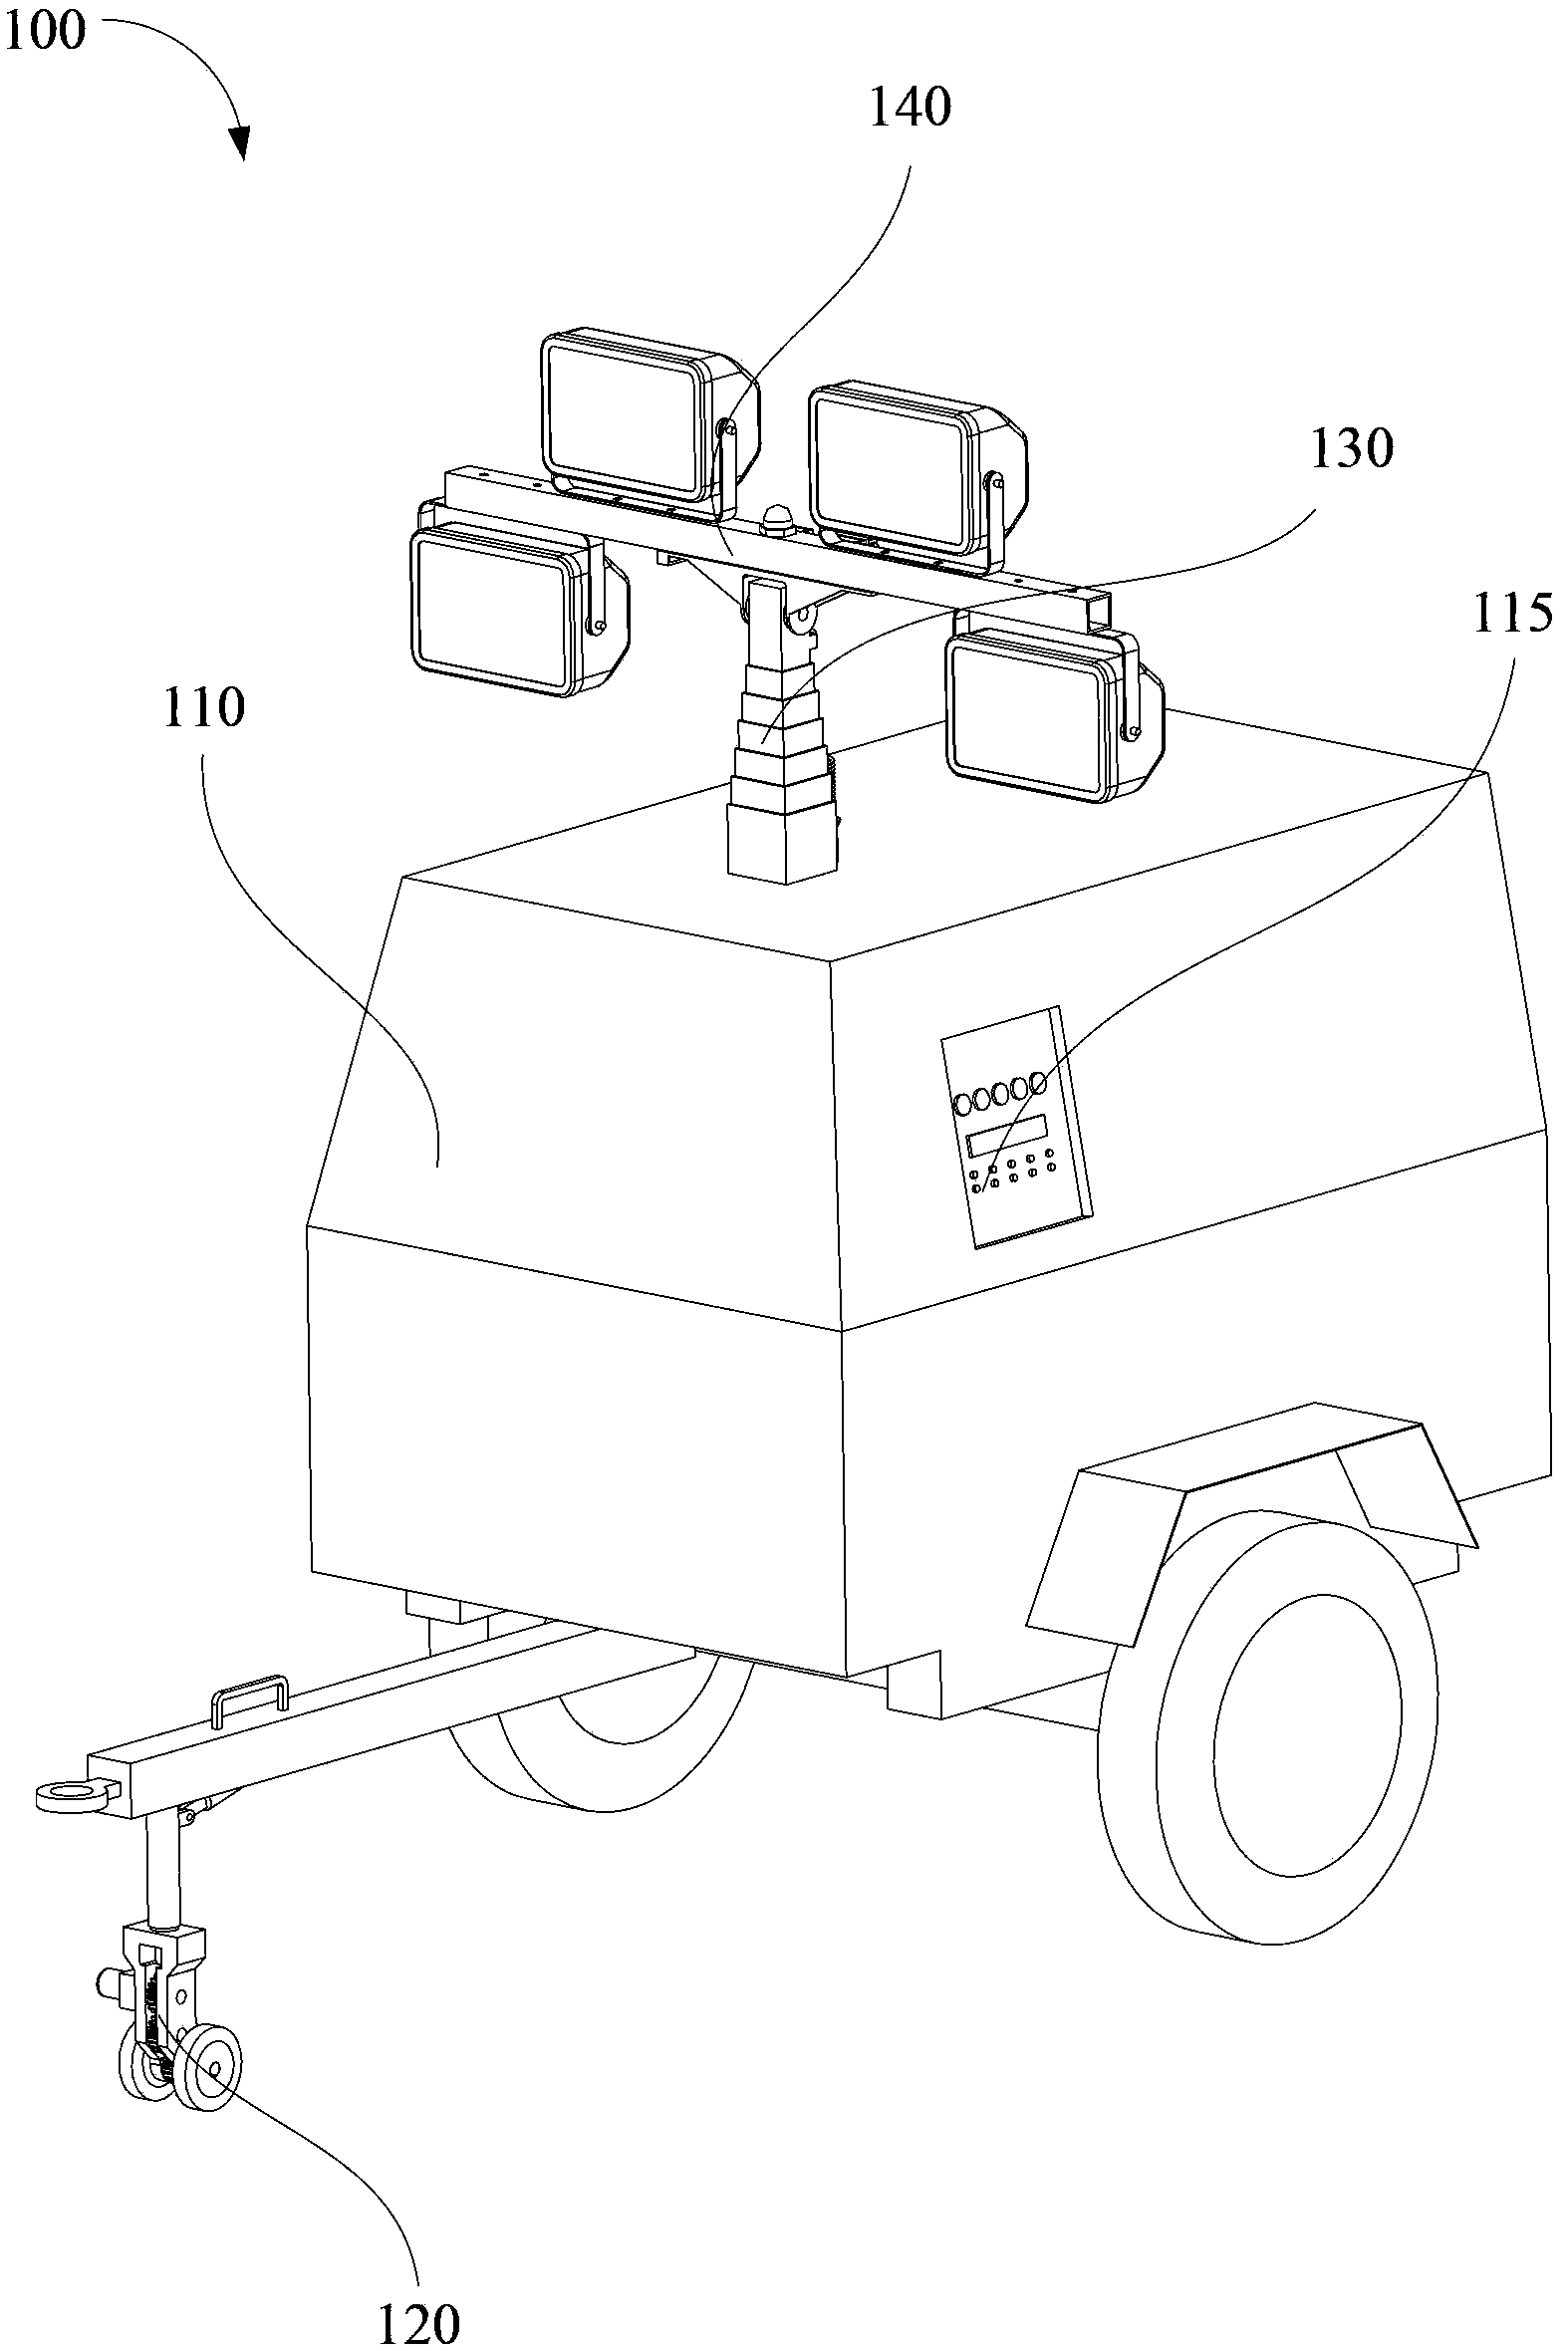 Mobile lighting tower based on straight gear drive